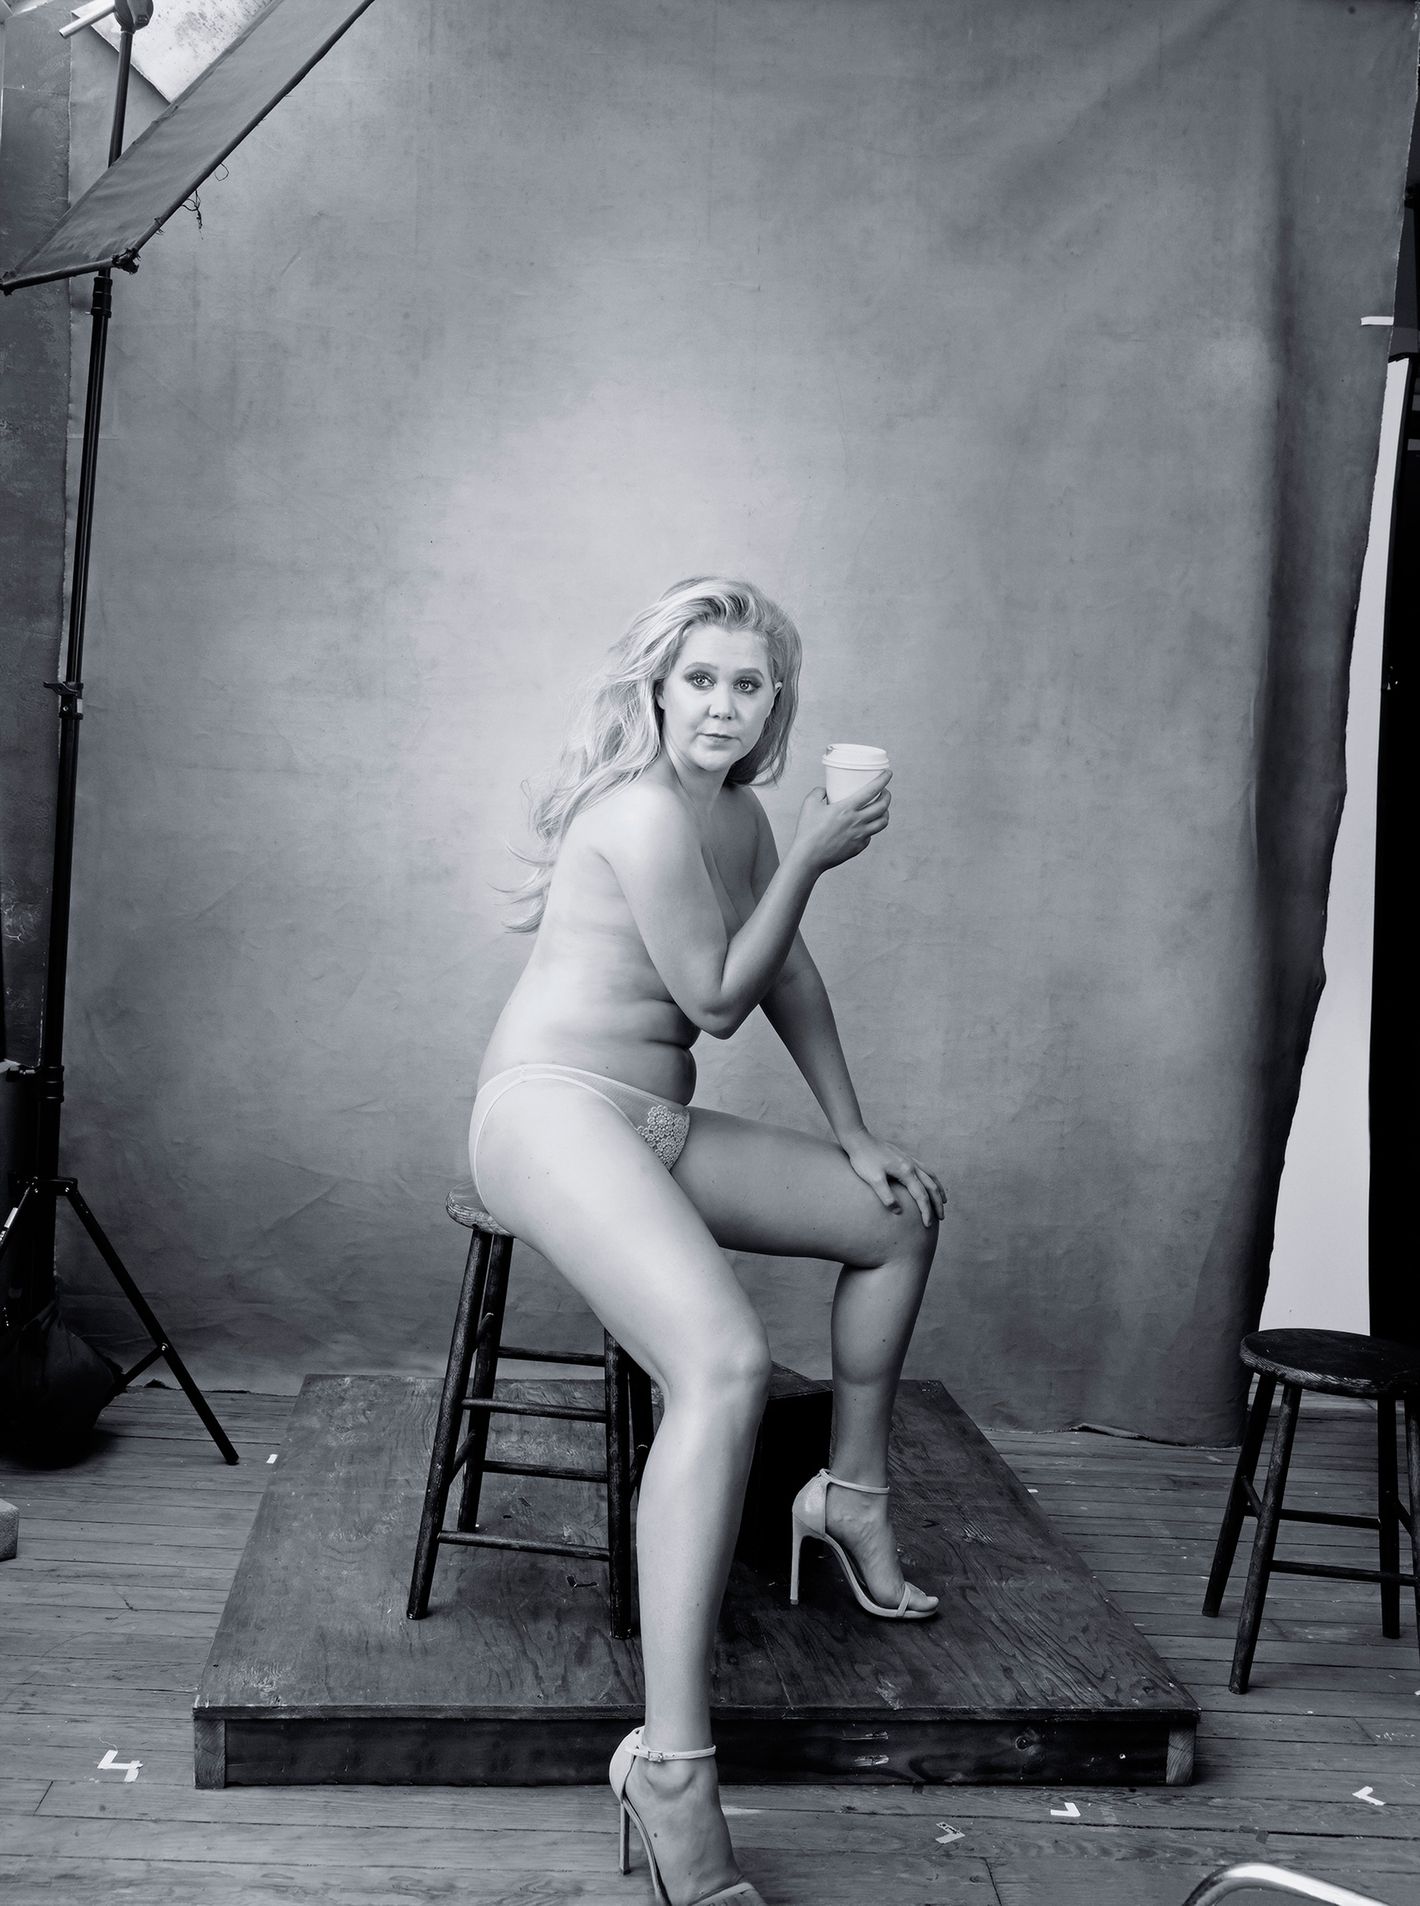 The evolution of the Pirelli calendar: from high-end porn to legitimate art, Photography